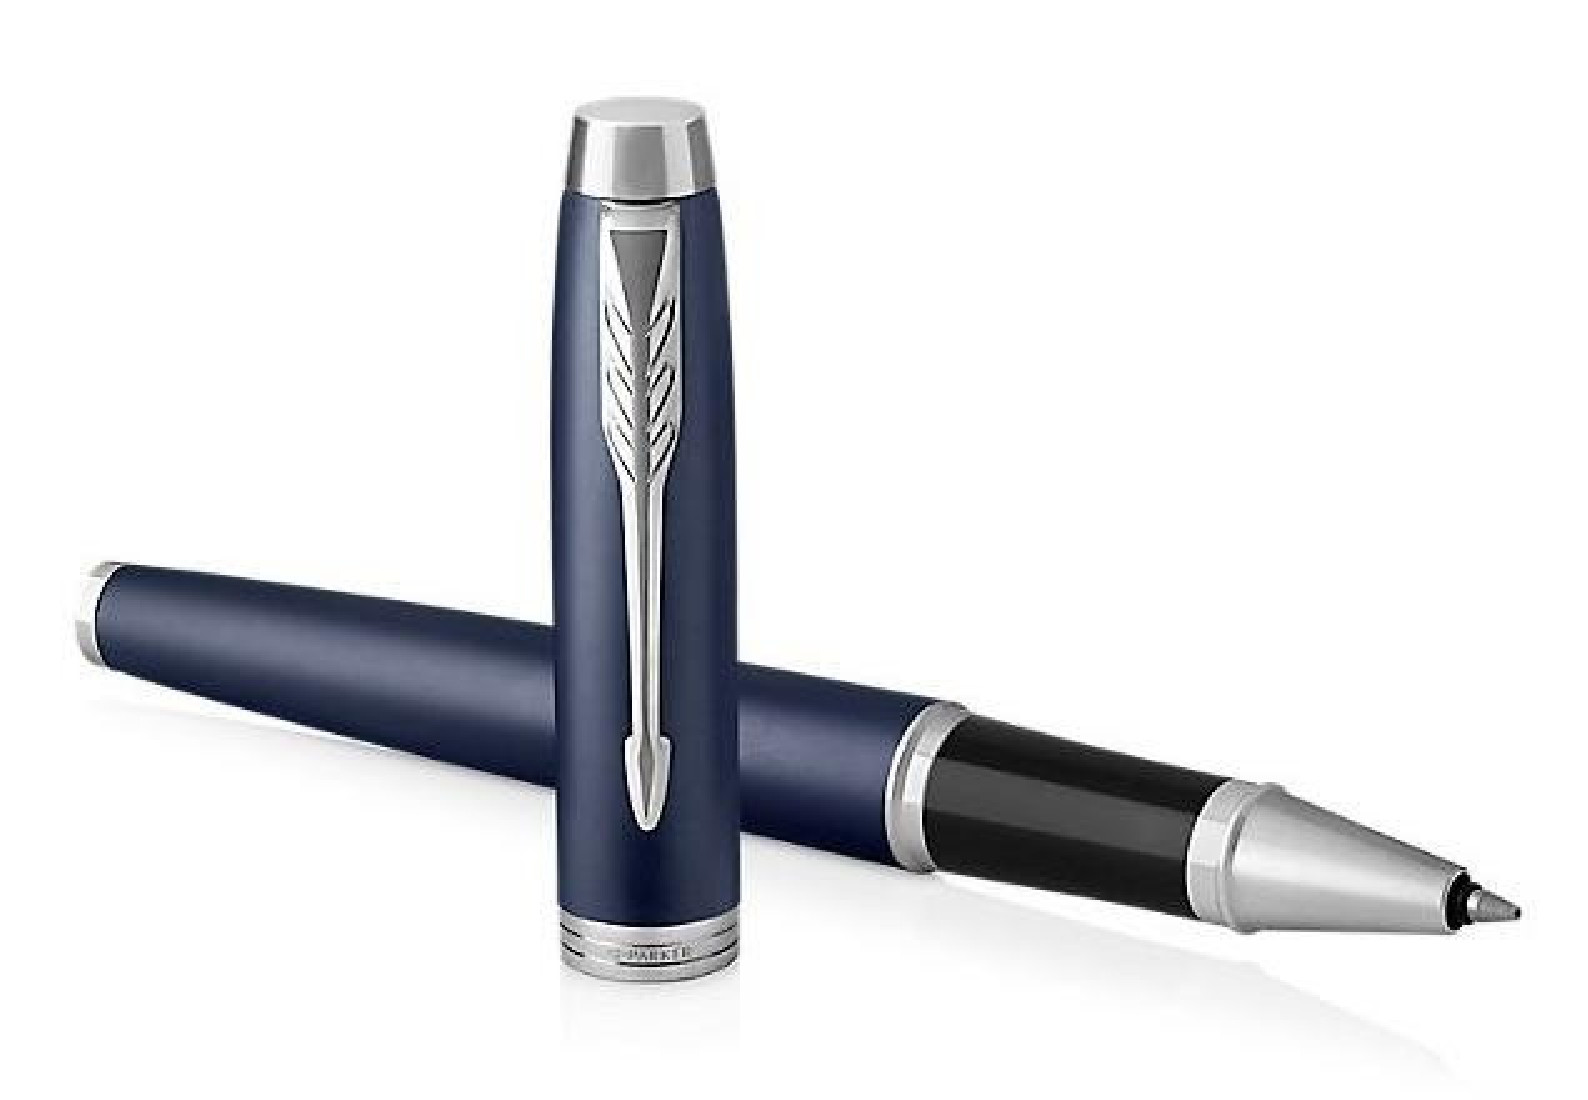 Parker IM Core Blue CT Rollerball